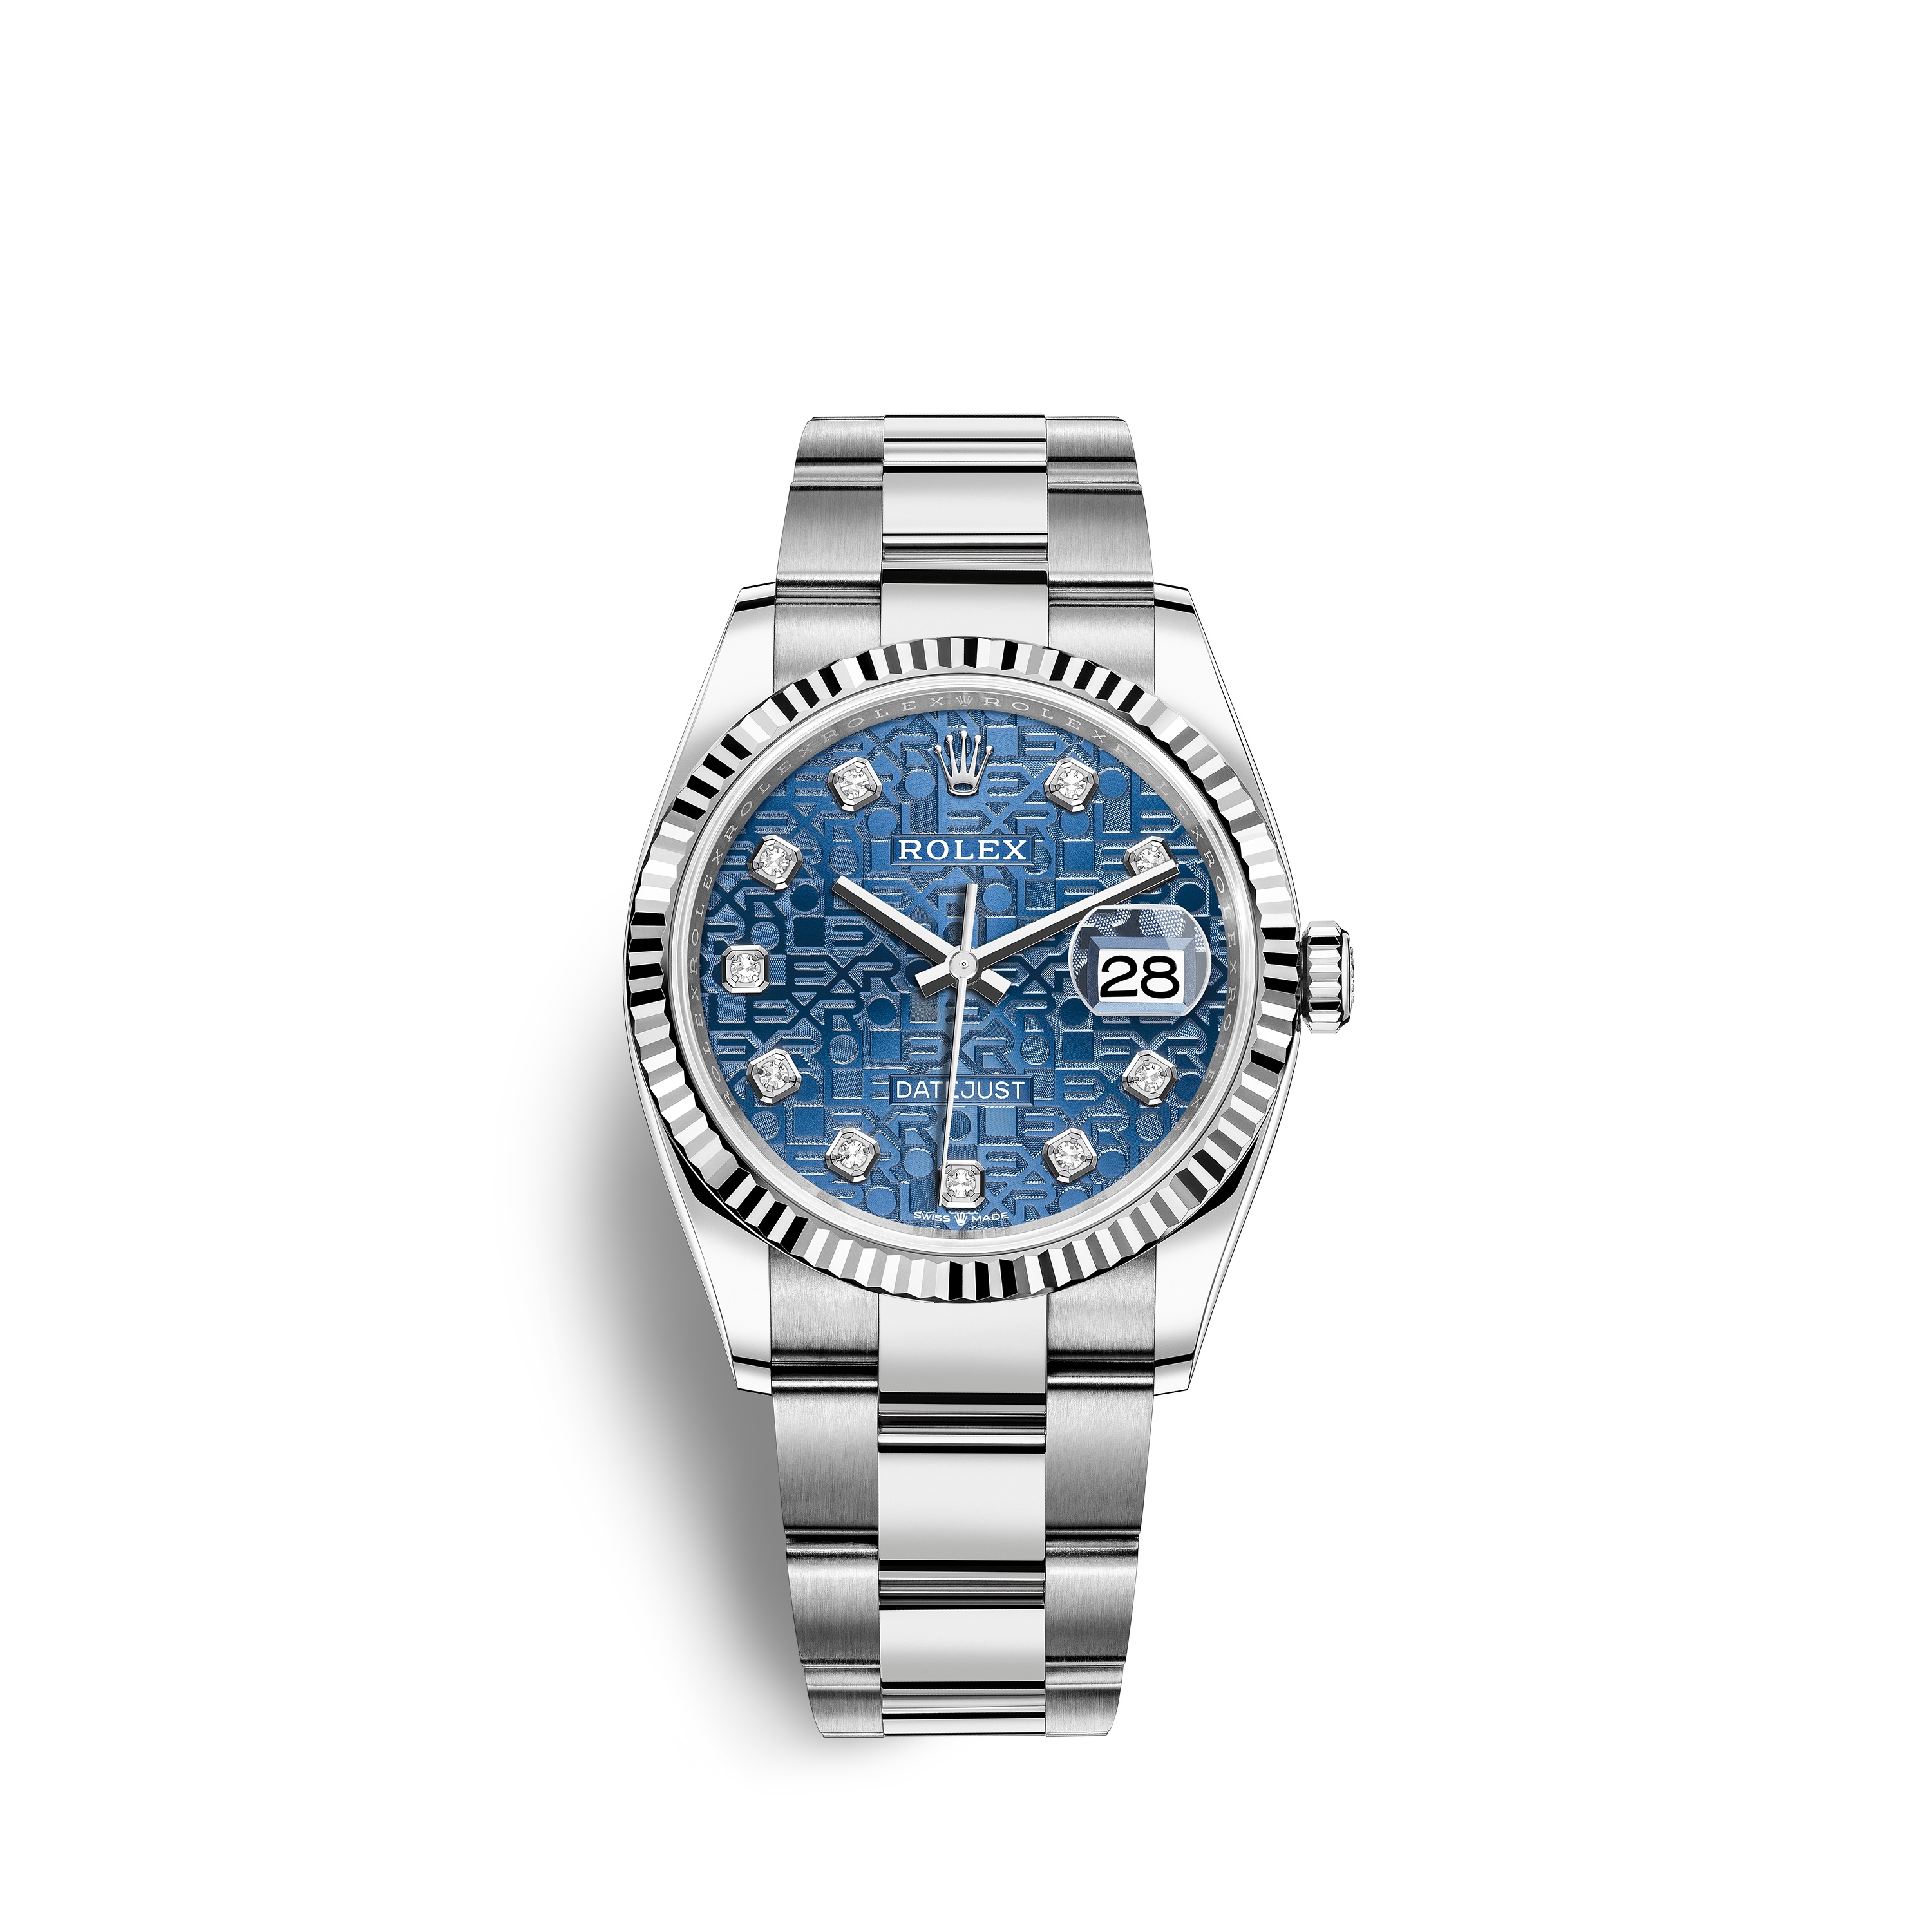 Datejust 36 126234 White Gold & Stainless Steel Watch (Blue Jubilee Design Set with Diamonds)